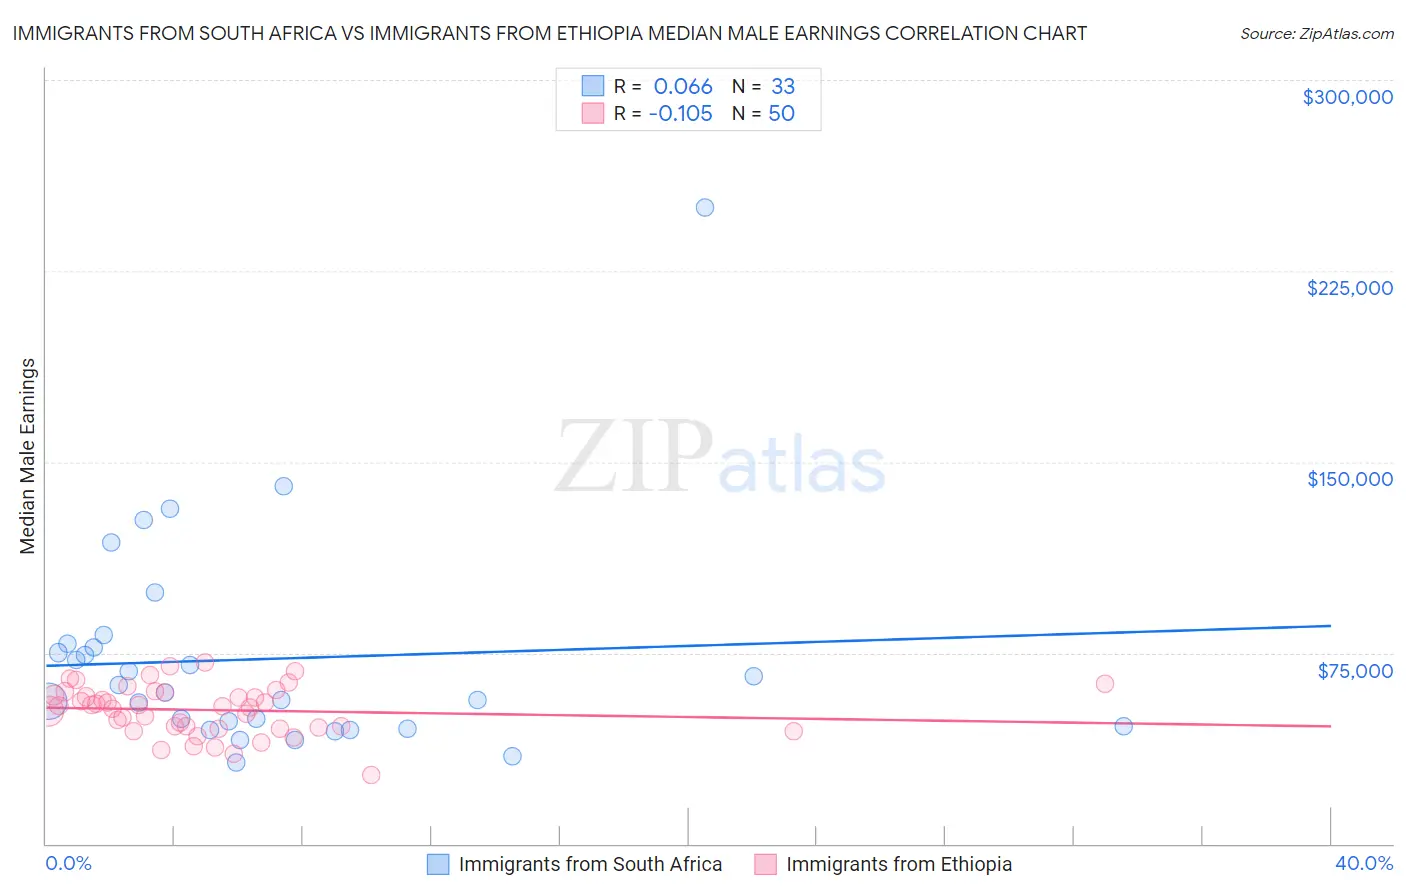 Immigrants from South Africa vs Immigrants from Ethiopia Median Male Earnings